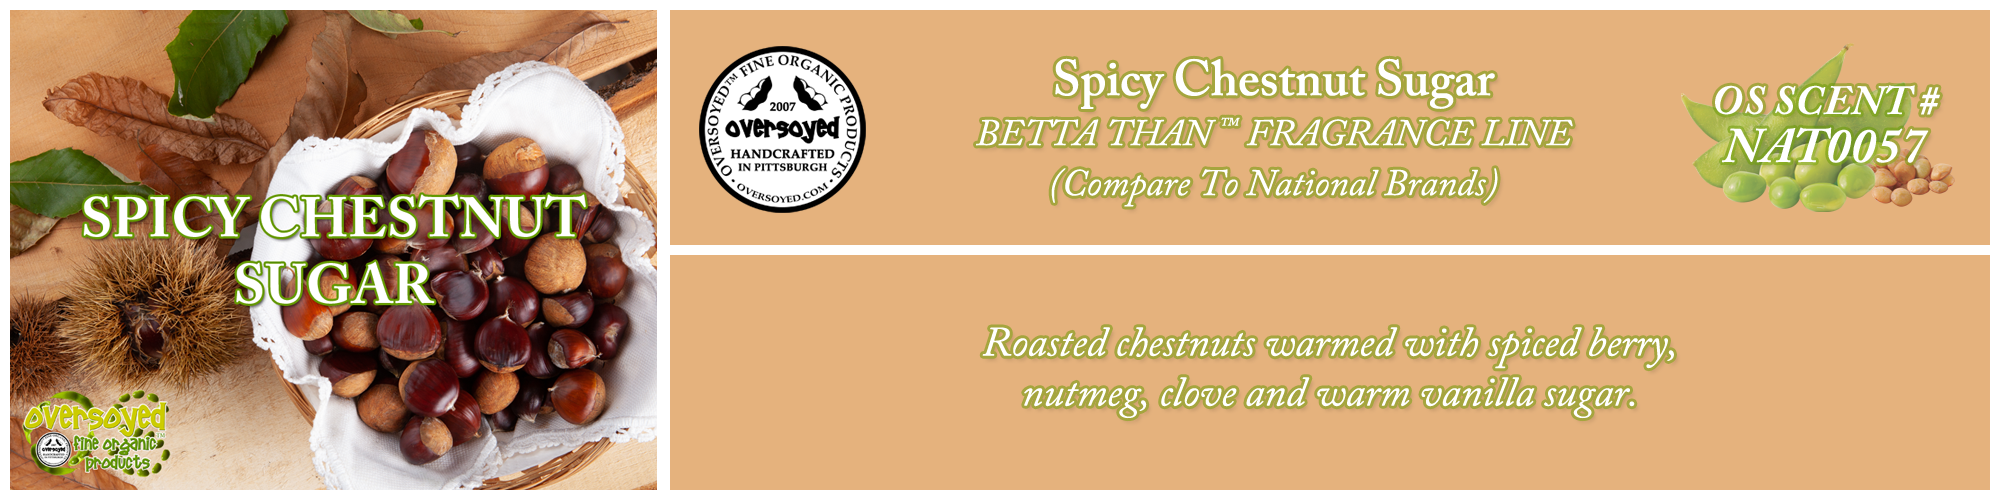 Spicy Chestnut Sugar Handcrafted Products Collection